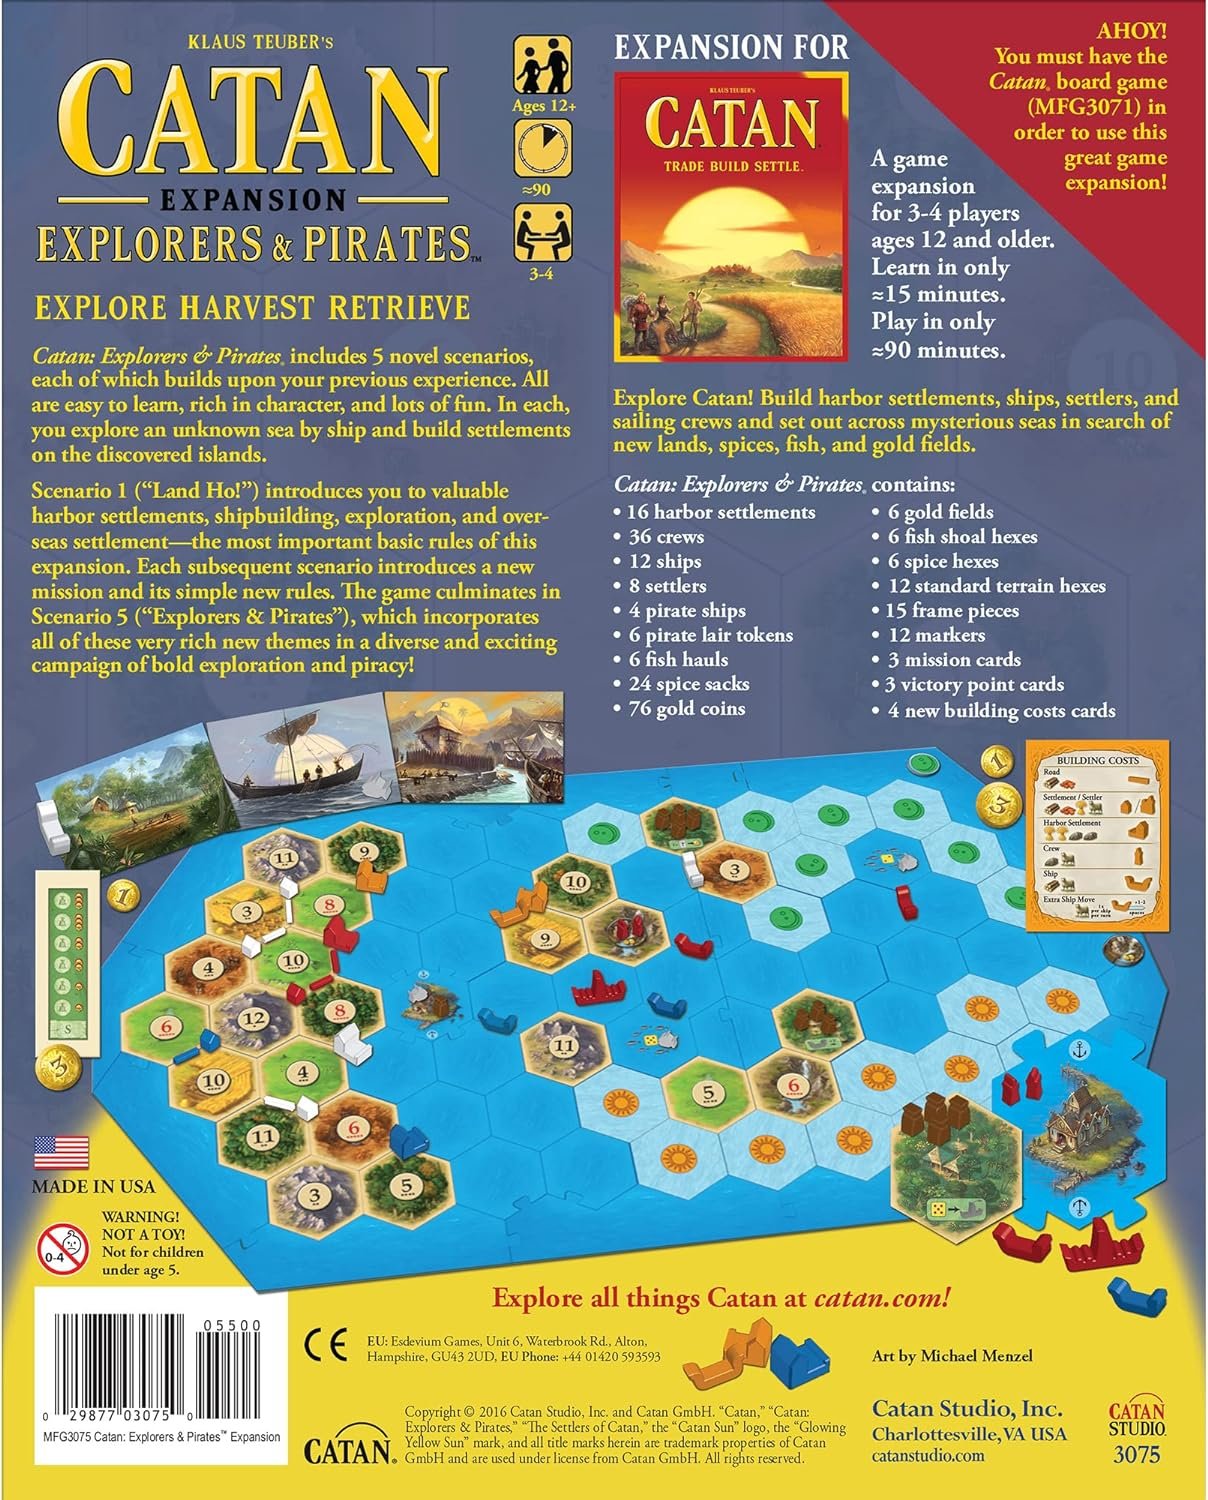 CATAN Explorers & Pirates Board Game Expansion Review